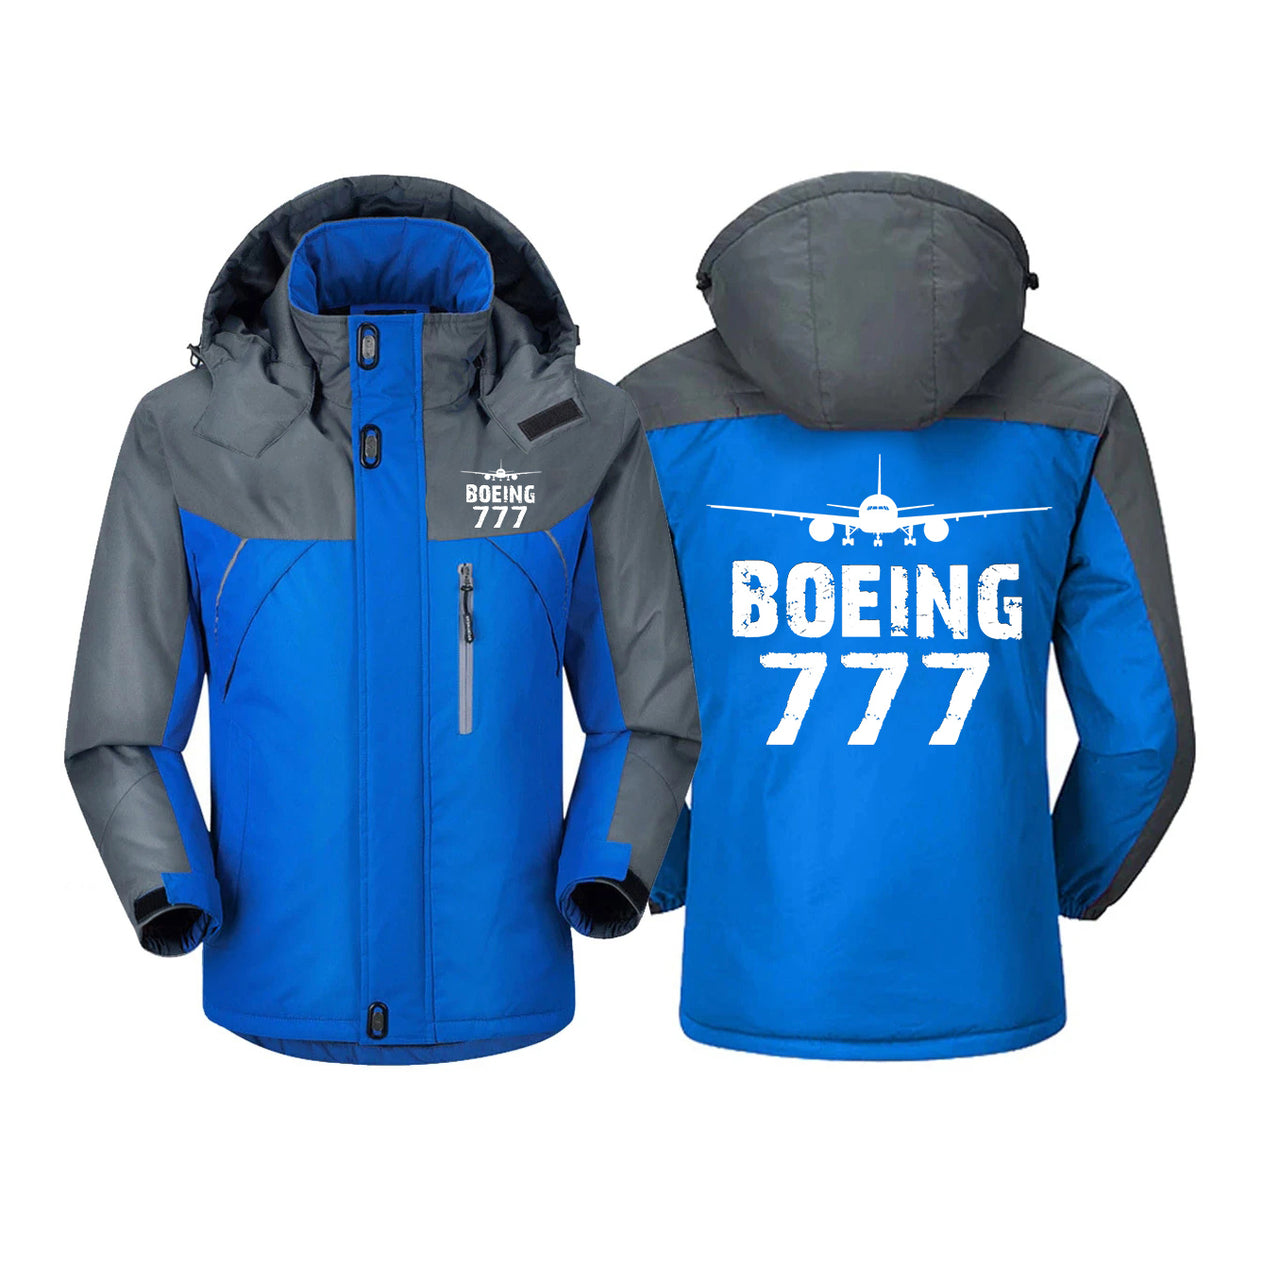 Boeing 777 & Plane Designed Thick Winter Jackets